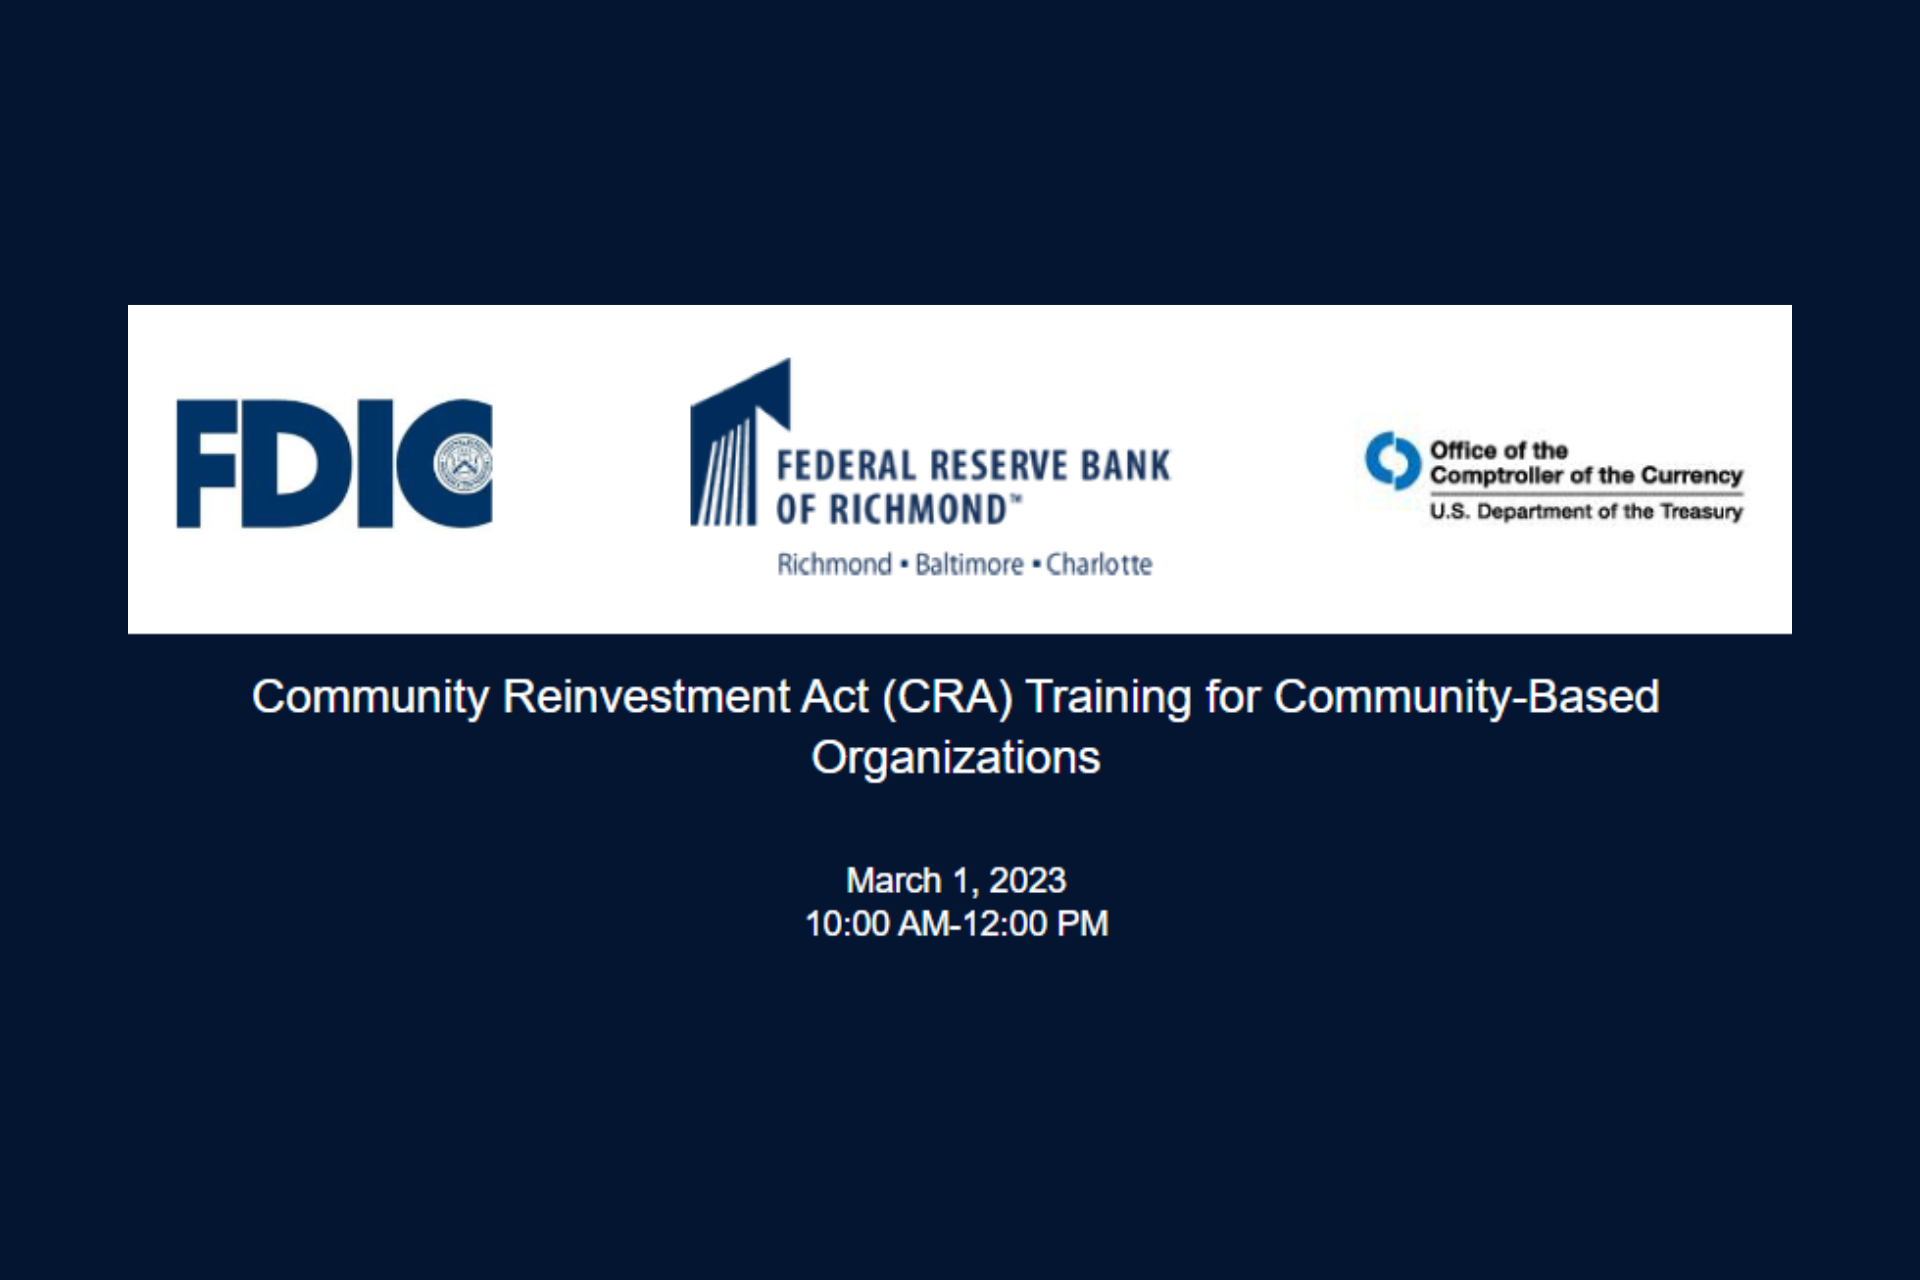 March 1, 2023 Community Reinvestment Act training for Community Based Organizations